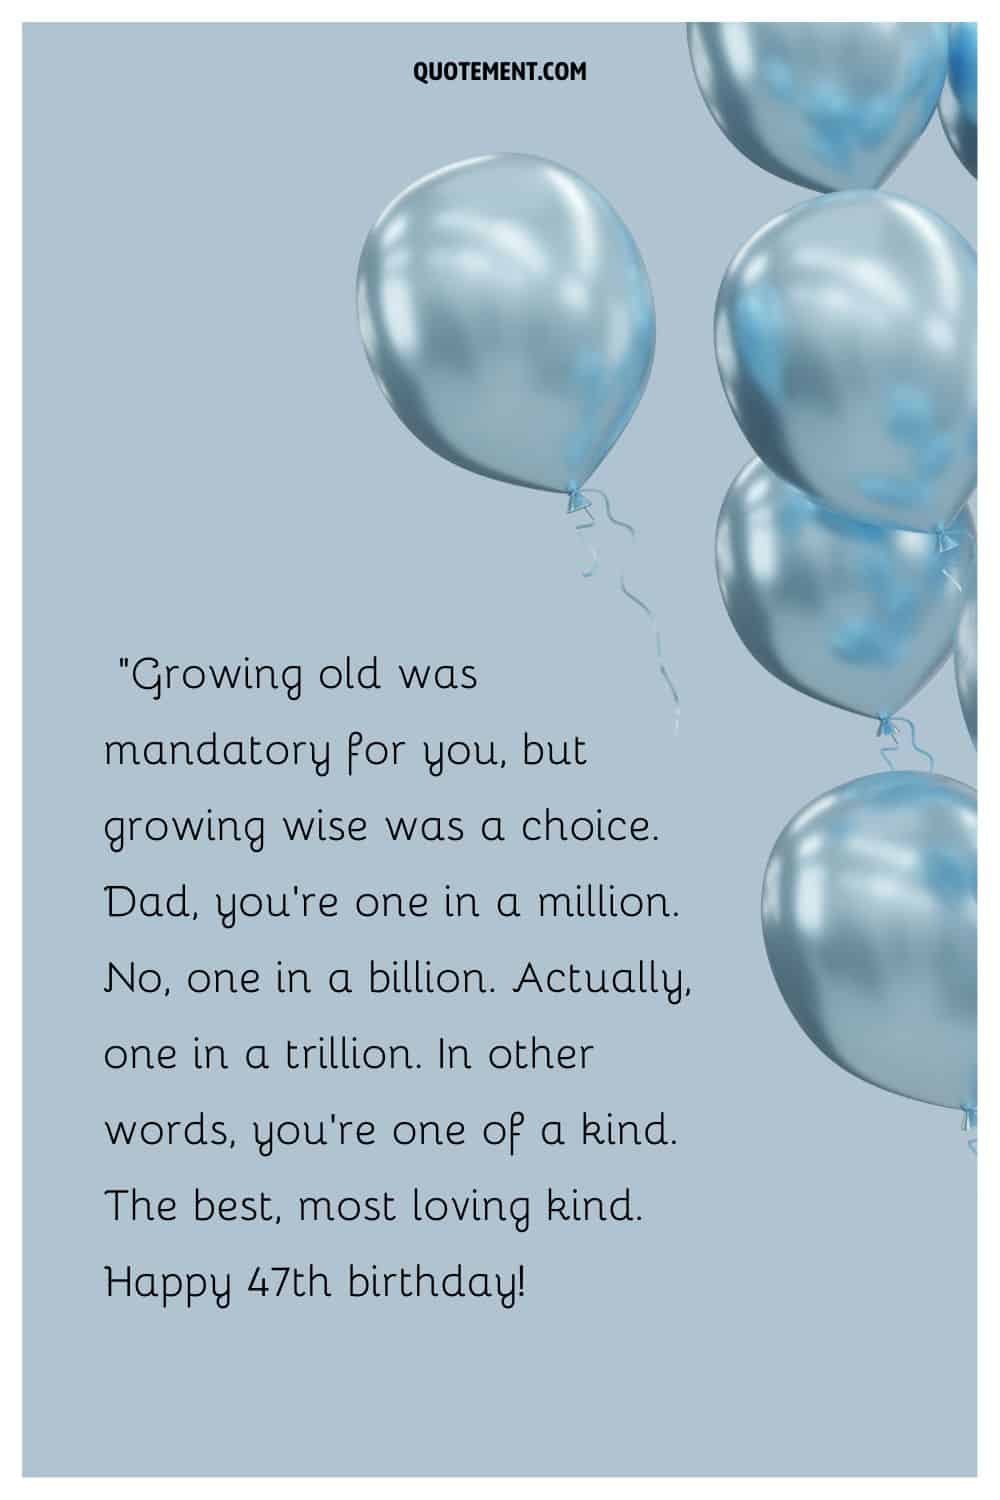 Sweet message for a dad who turns 47 and silver balloons on the right